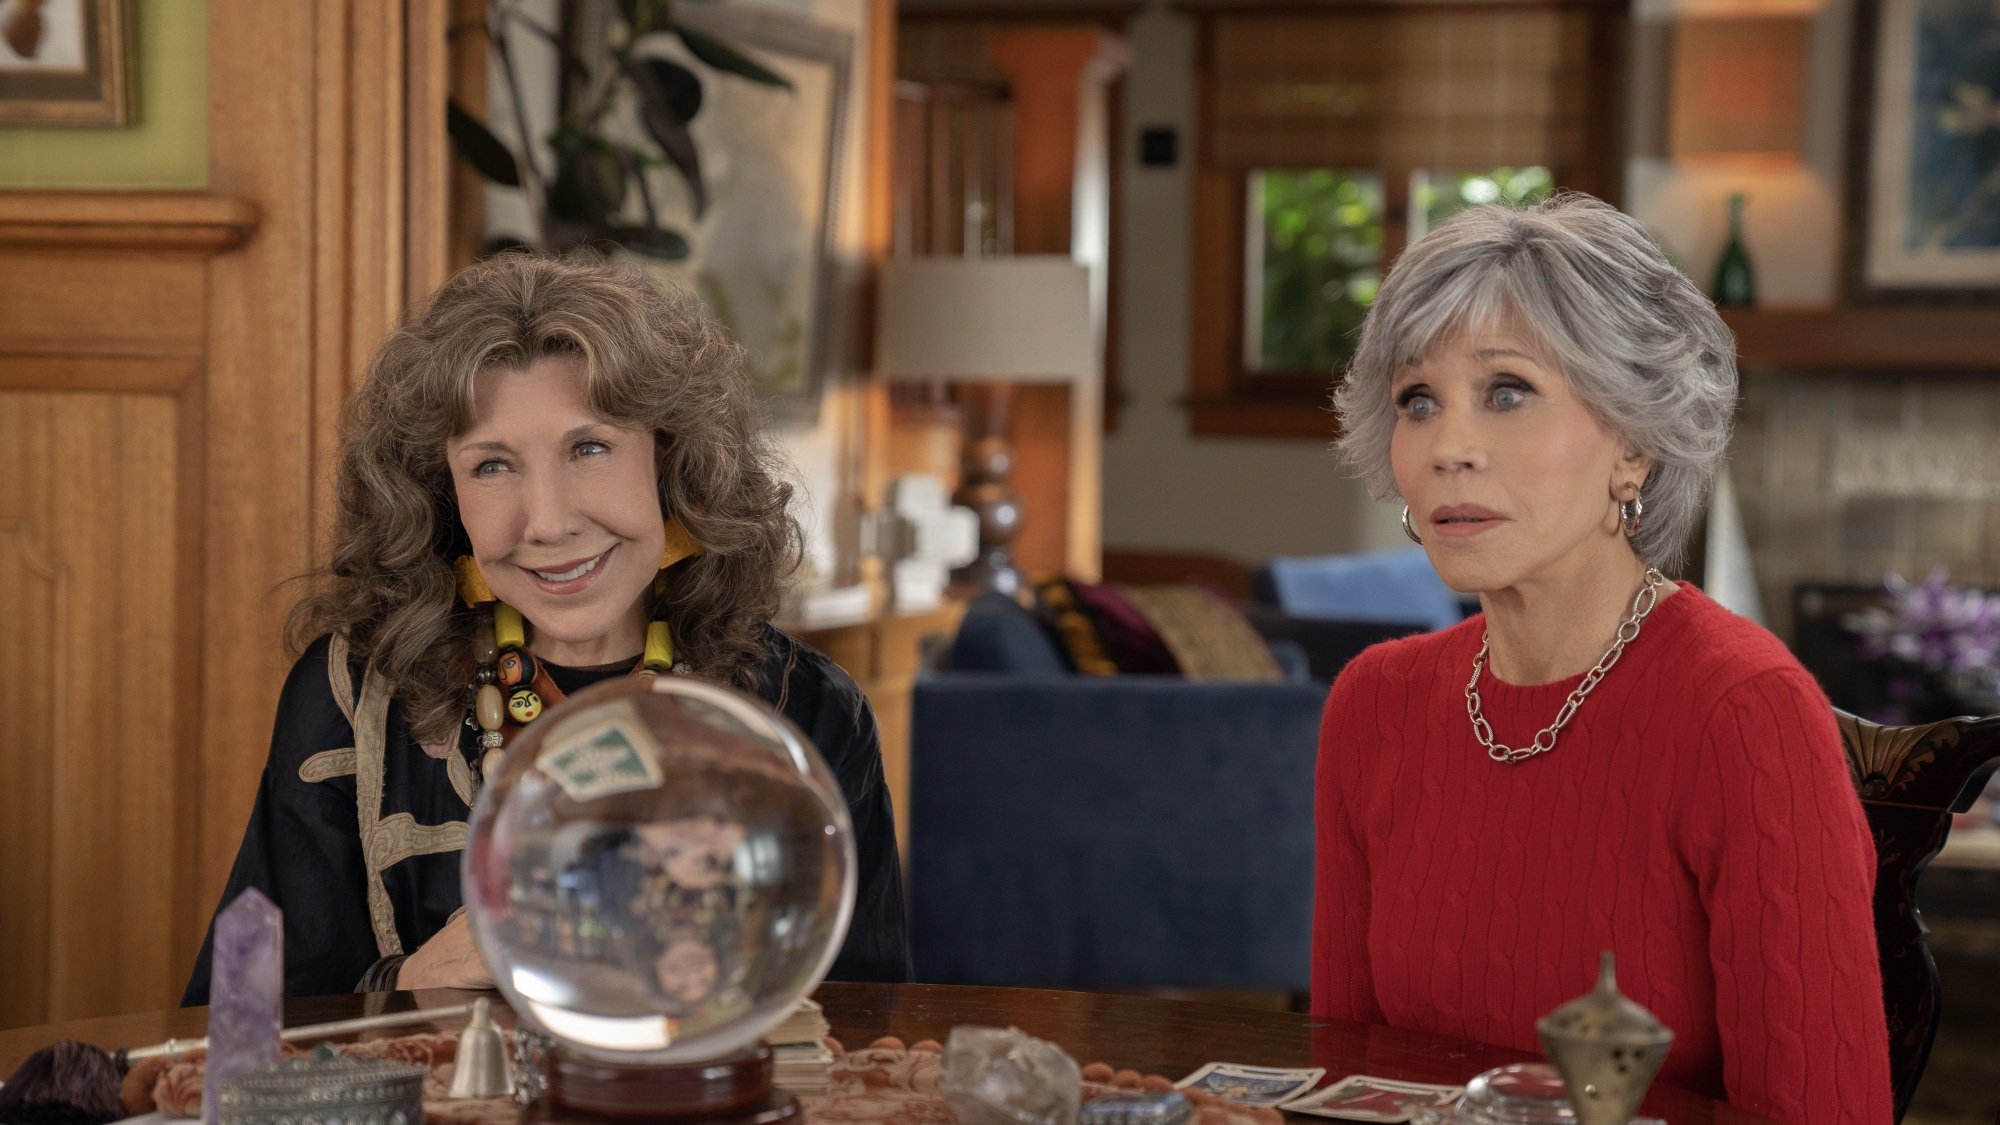 Two older women, one in a red sweater, one in a black draped shirt, sit at a table with a crystal ball on it.